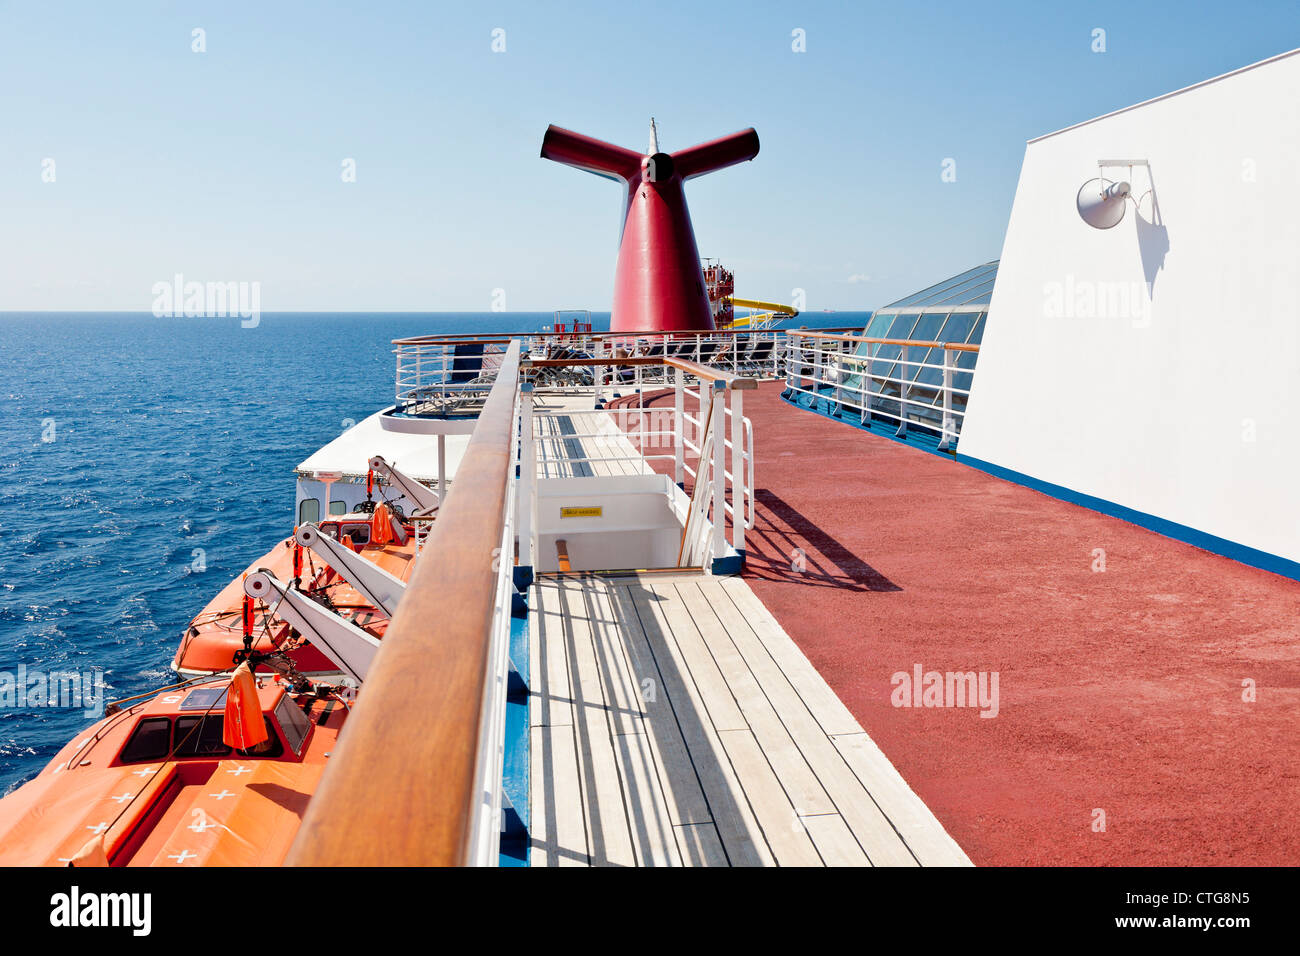 Life boats and running track near stern on the Carnival Fascination cruise ship Stock Photo